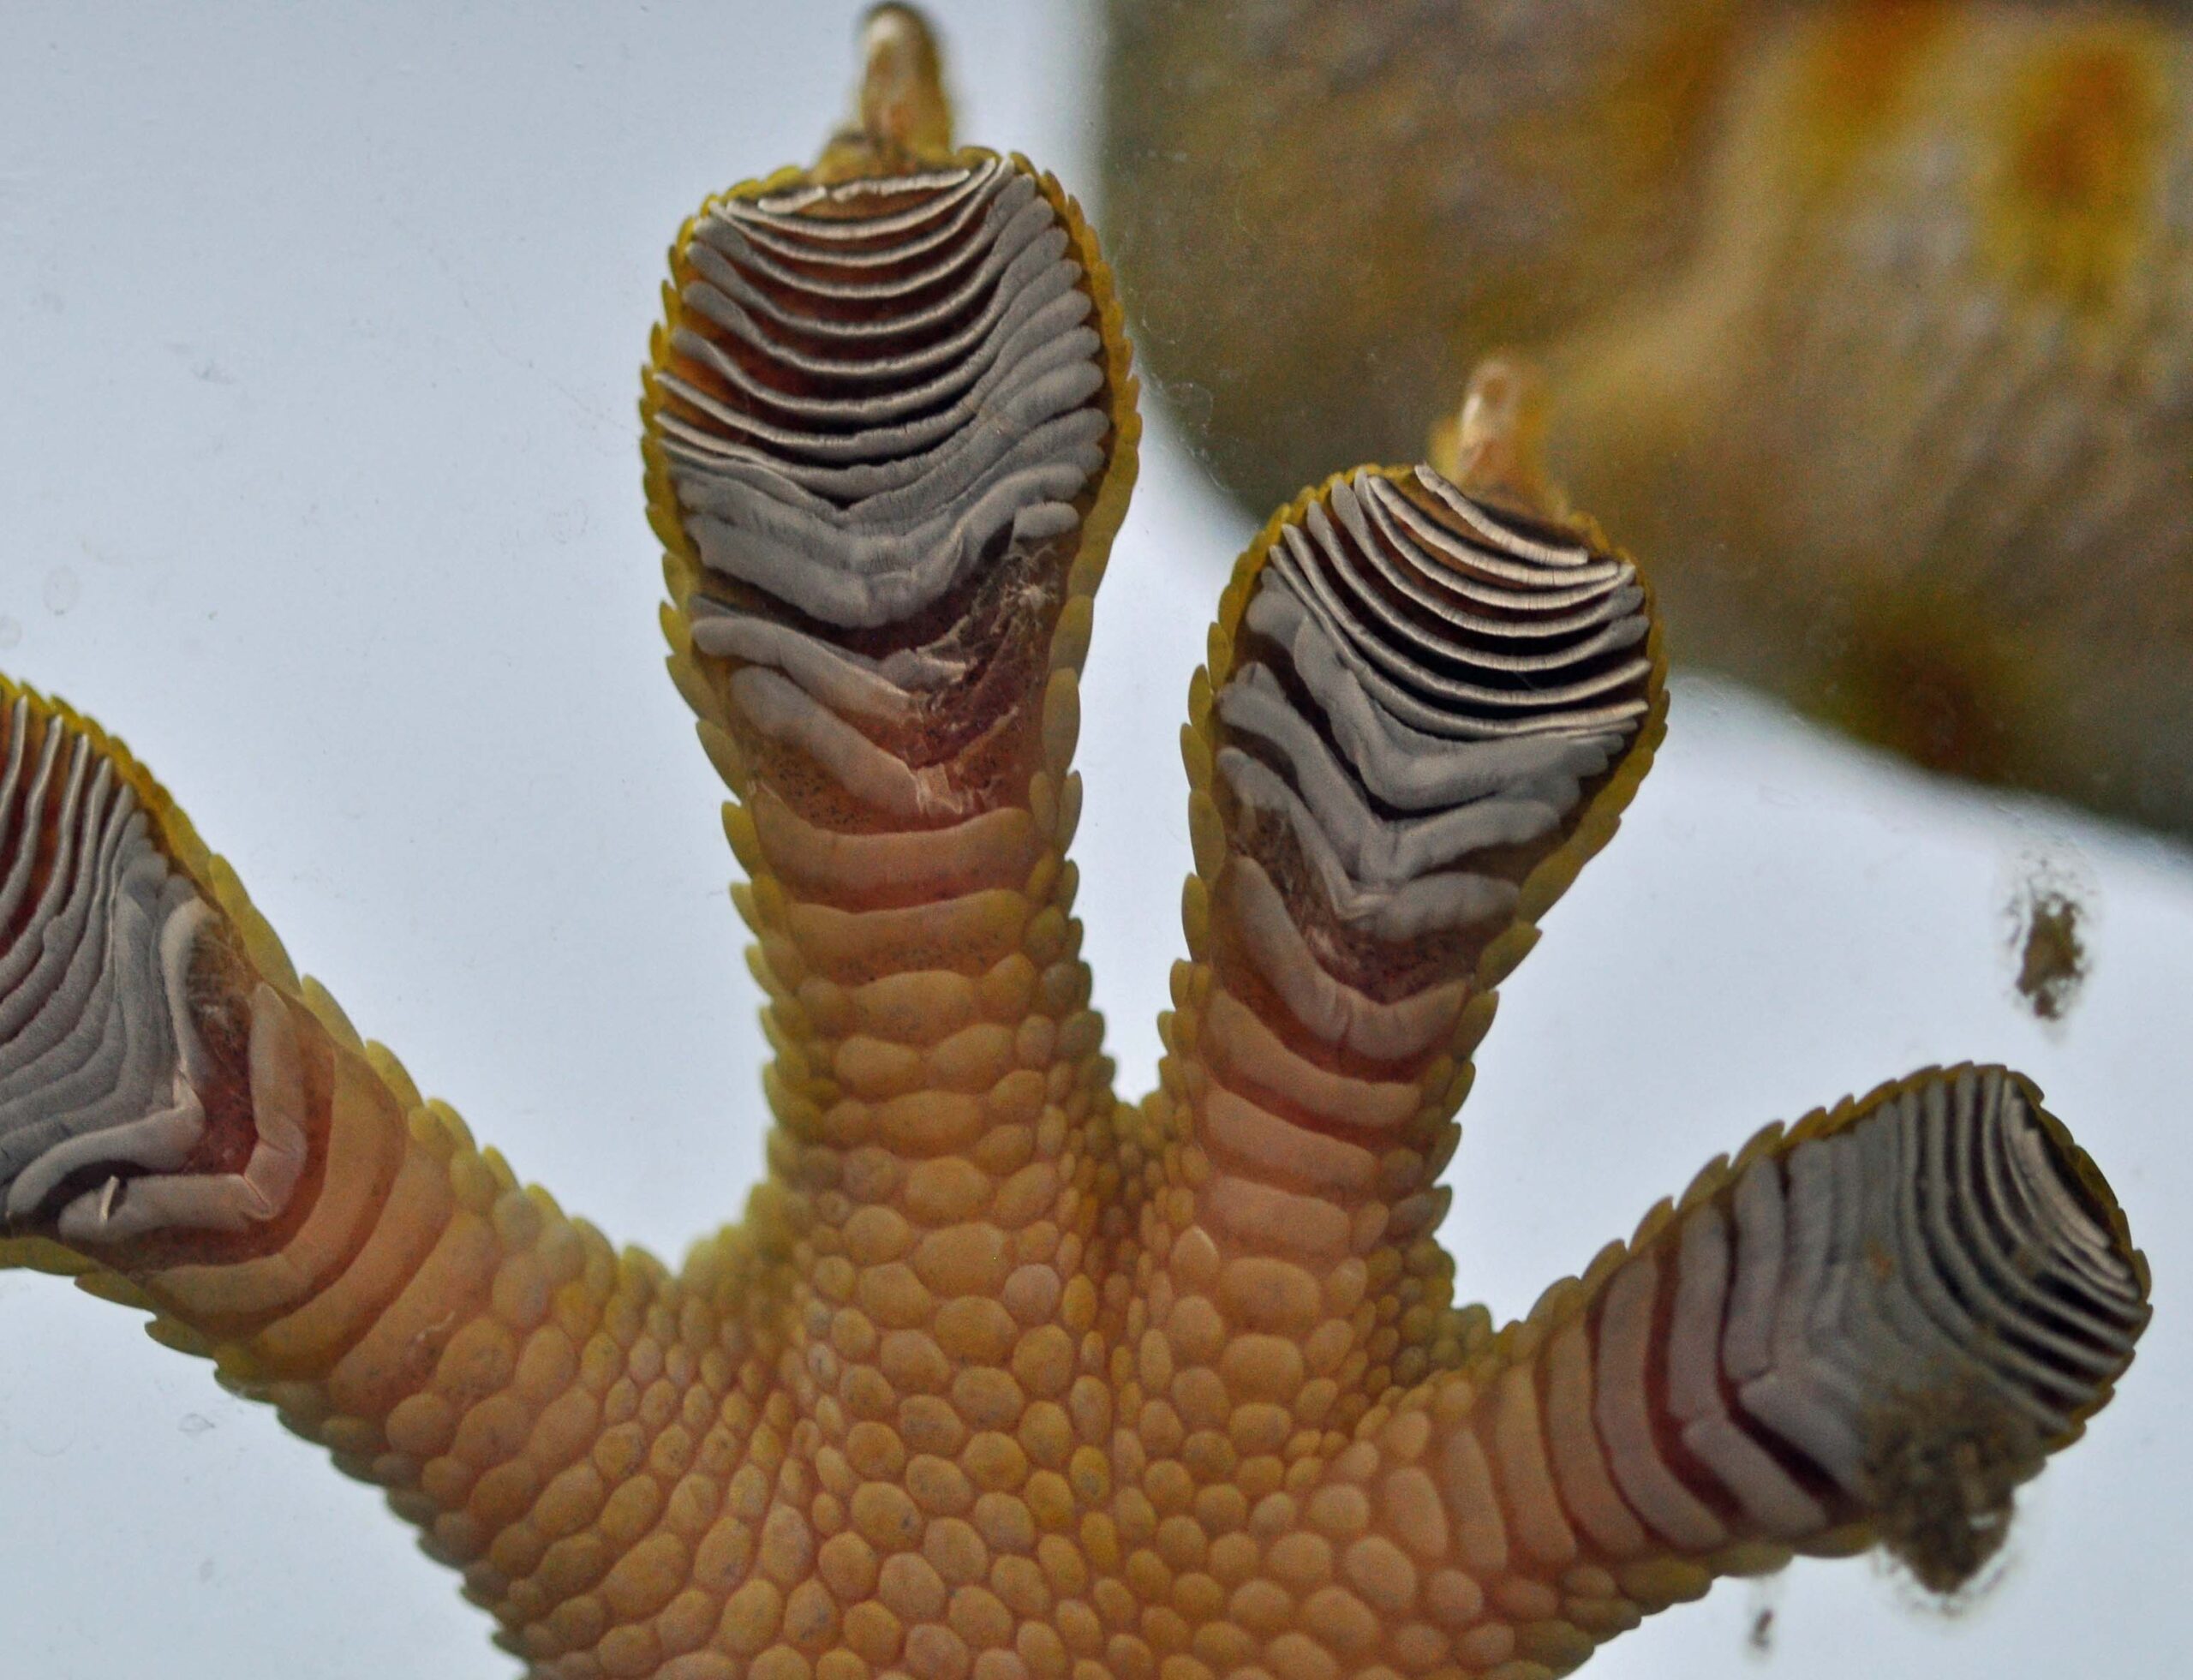 Gecko toes